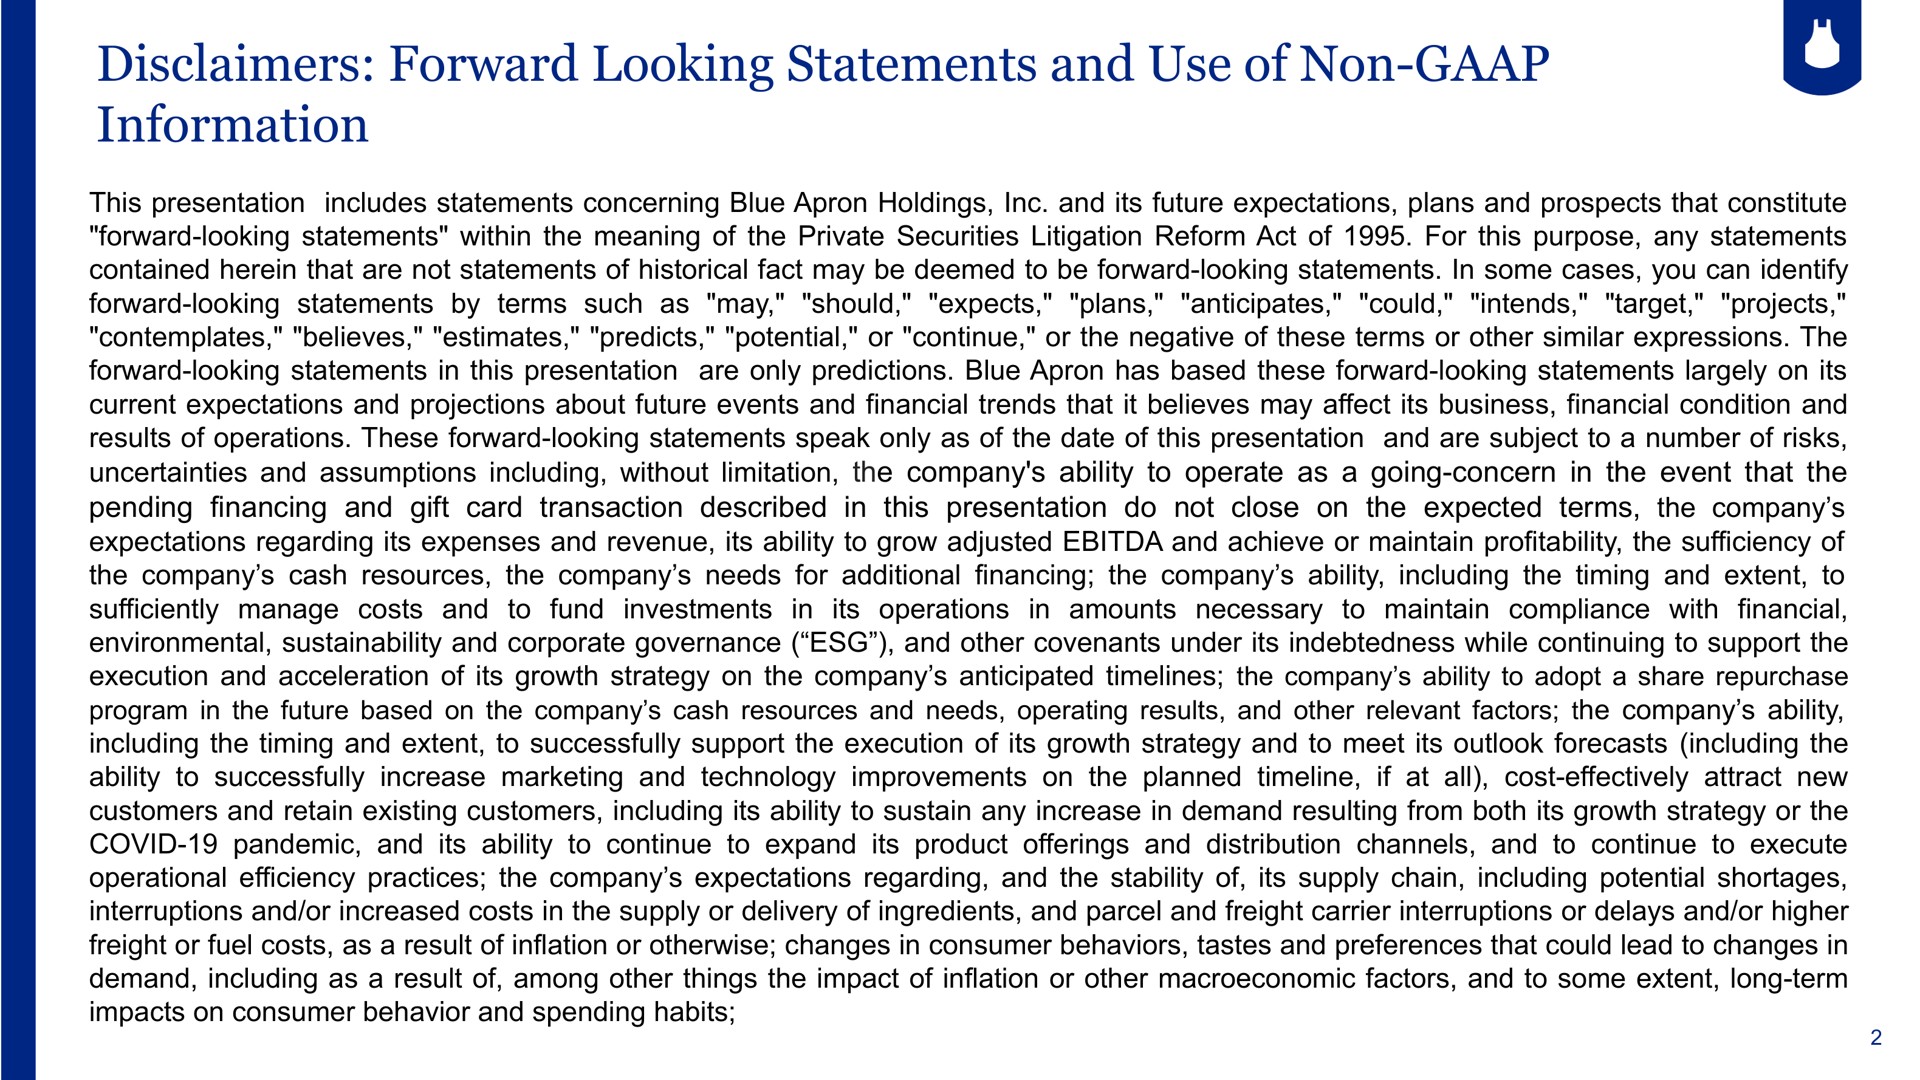 disclaimers forward looking statements and use of non information this presentation includes statements concerning blue apron holdings and its future expectations plans and prospects that constitute forward looking statements within the meaning of the private securities litigation reform act of for this purpose any statements contained herein that are not statements of historical fact may be deemed to be forward looking statements in some cases you can identify forward looking statements by terms such as may should expects plans anticipates could intends target projects contemplates believes estimates predicts potential or continue or the negative of these terms or other similar expressions the forward looking statements in this presentation are only predictions blue apron has based these forward looking statements largely on its current expectations and projections about future events and financial trends that it believes may affect its business financial condition and results of operations these forward looking statements speak only as of the date of this presentation and are subject to a number of risks uncertainties and assumptions including without limitation the company ability to operate as a going concern in the event that the pending financing and gift card transaction described in this presentation do not close on the expected terms the company expectations regarding its expenses and revenue its ability to grow adjusted and achieve or maintain profitability the sufficiency of the company cash resources the company needs for additional financing the company ability including the timing and extent to sufficiently manage costs and to fund investments in its operations in amounts necessary to maintain compliance with financial environmental and corporate governance and other covenants under its indebtedness while continuing to support the execution and acceleration of its growth strategy on the company anticipated the company ability to adopt a share repurchase including the timing and extent to successfully support the execution of its growth strategy and to meet its outlook forecasts including the ability to successfully increase marketing and technology improvements on the planned if at all cost effectively attract new customers and retain existing customers including its ability to sustain any increase in demand resulting from both its growth strategy or the covid pandemic and its ability to continue to expand its product offerings and distribution channels and to continue to execute operational efficiency practices the company expectations regarding and the stability of its supply chain including potential shortages interruptions and or increased costs in the supply or delivery of ingredients and parcel and freight carrier interruptions or delays and or higher freight or fuel costs as a result of inflation or otherwise changes in consumer behaviors tastes and preferences that could lead to changes in demand including as a result of among other things the impact of inflation or other factors and to some extent long term impacts on consumer behavior and spending habits | Blue Apron